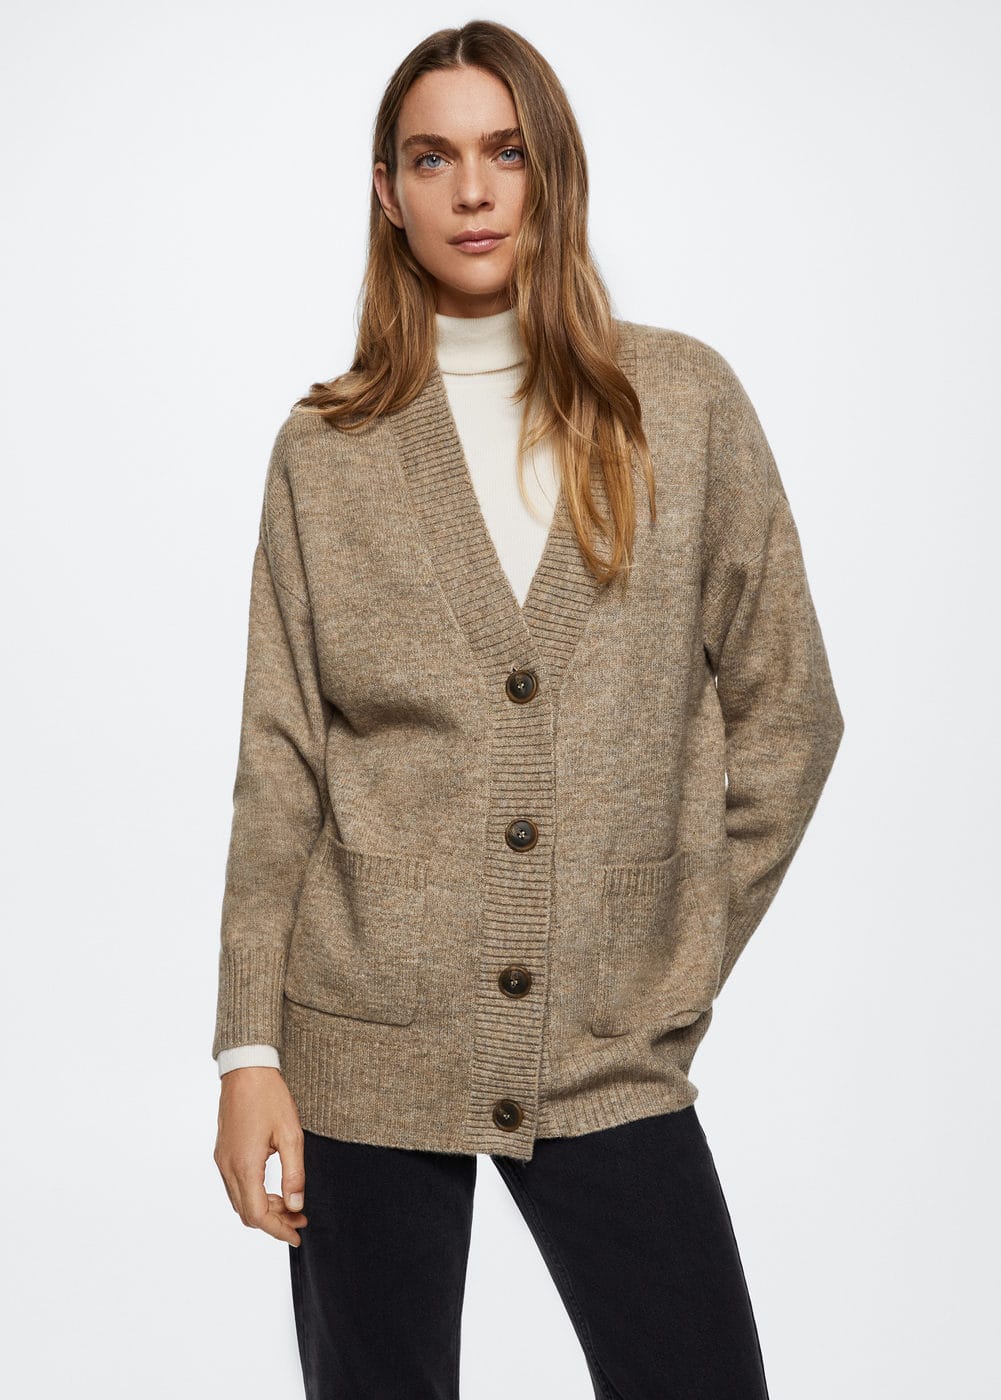 Mango Oversized Cardigan With Buttons